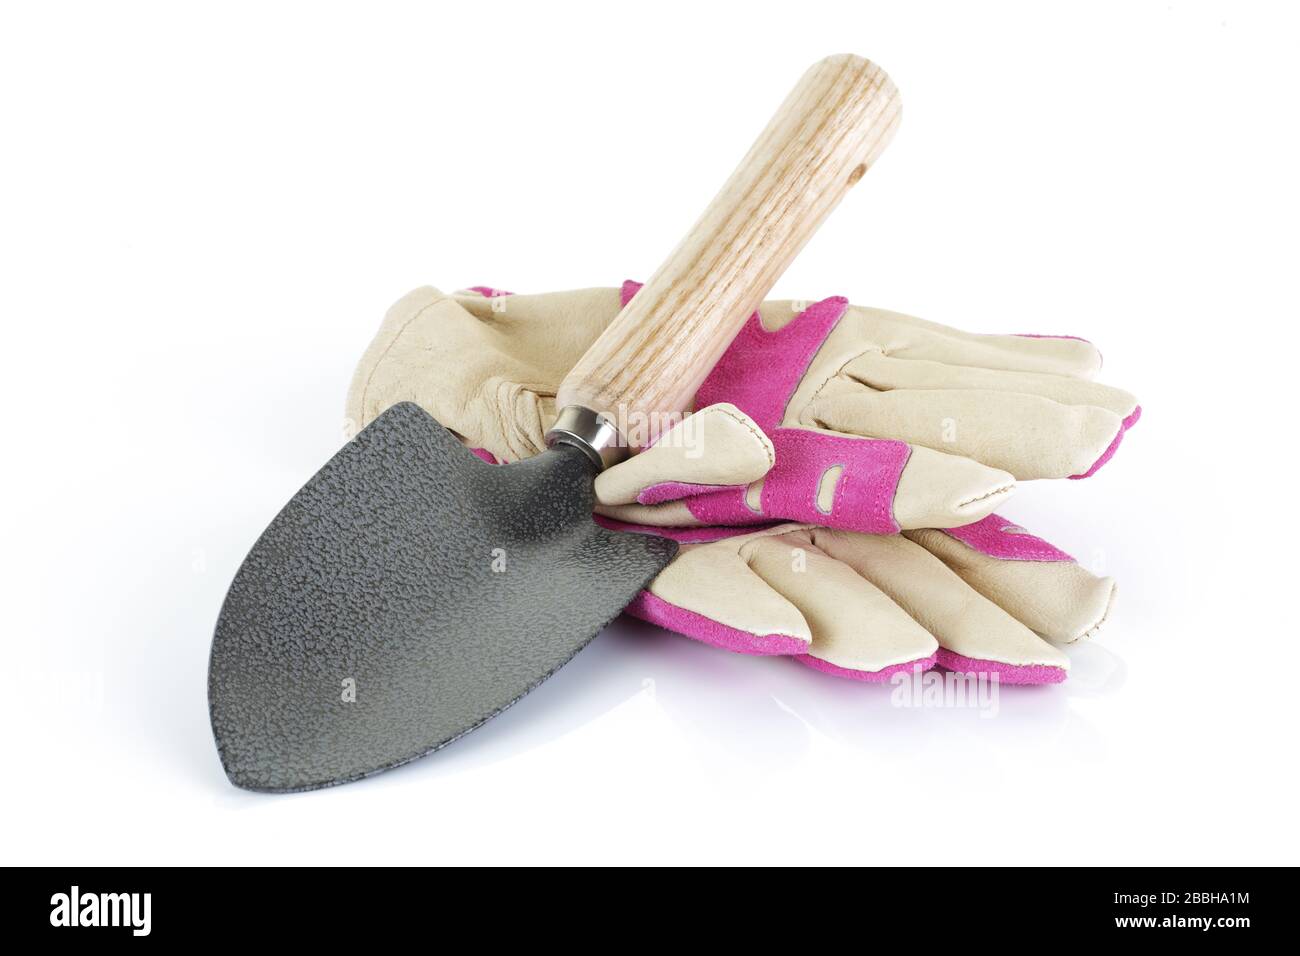 Garden trowel and gloves on a white background Stock Photo